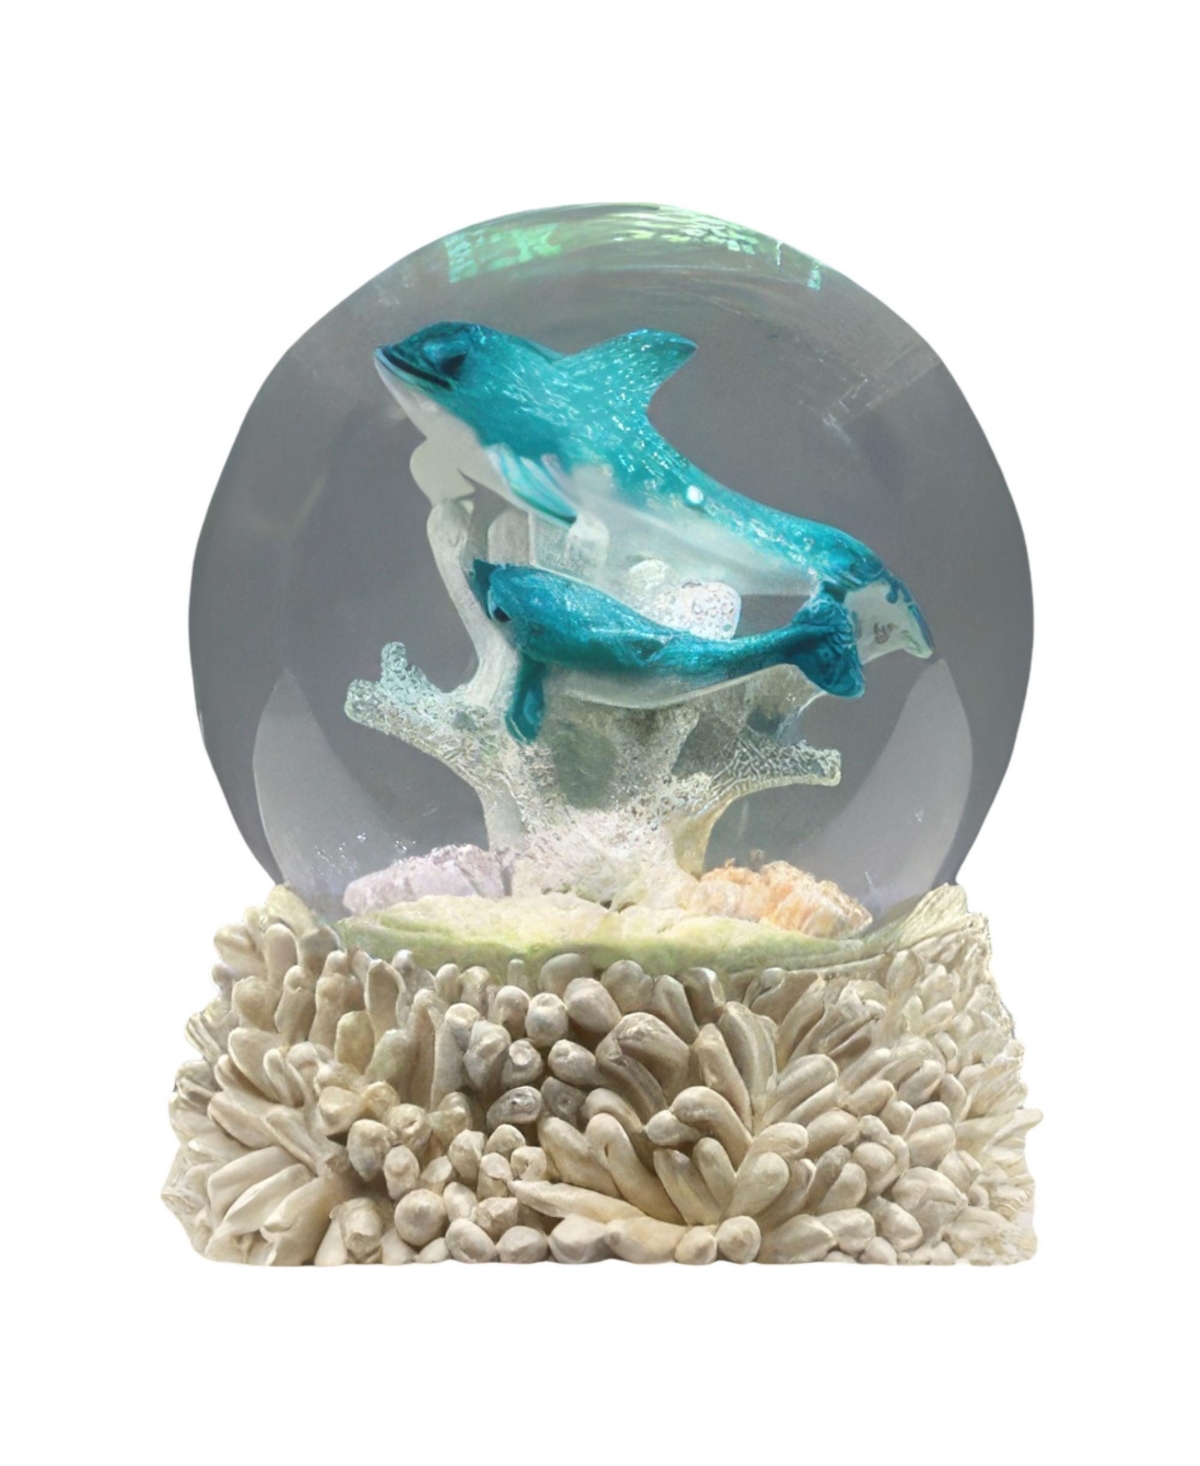 3.25"H Dolphin Snow Globe Home Decor Perfect Gift for House Warming, Holidays and Birthdays - Multicolor